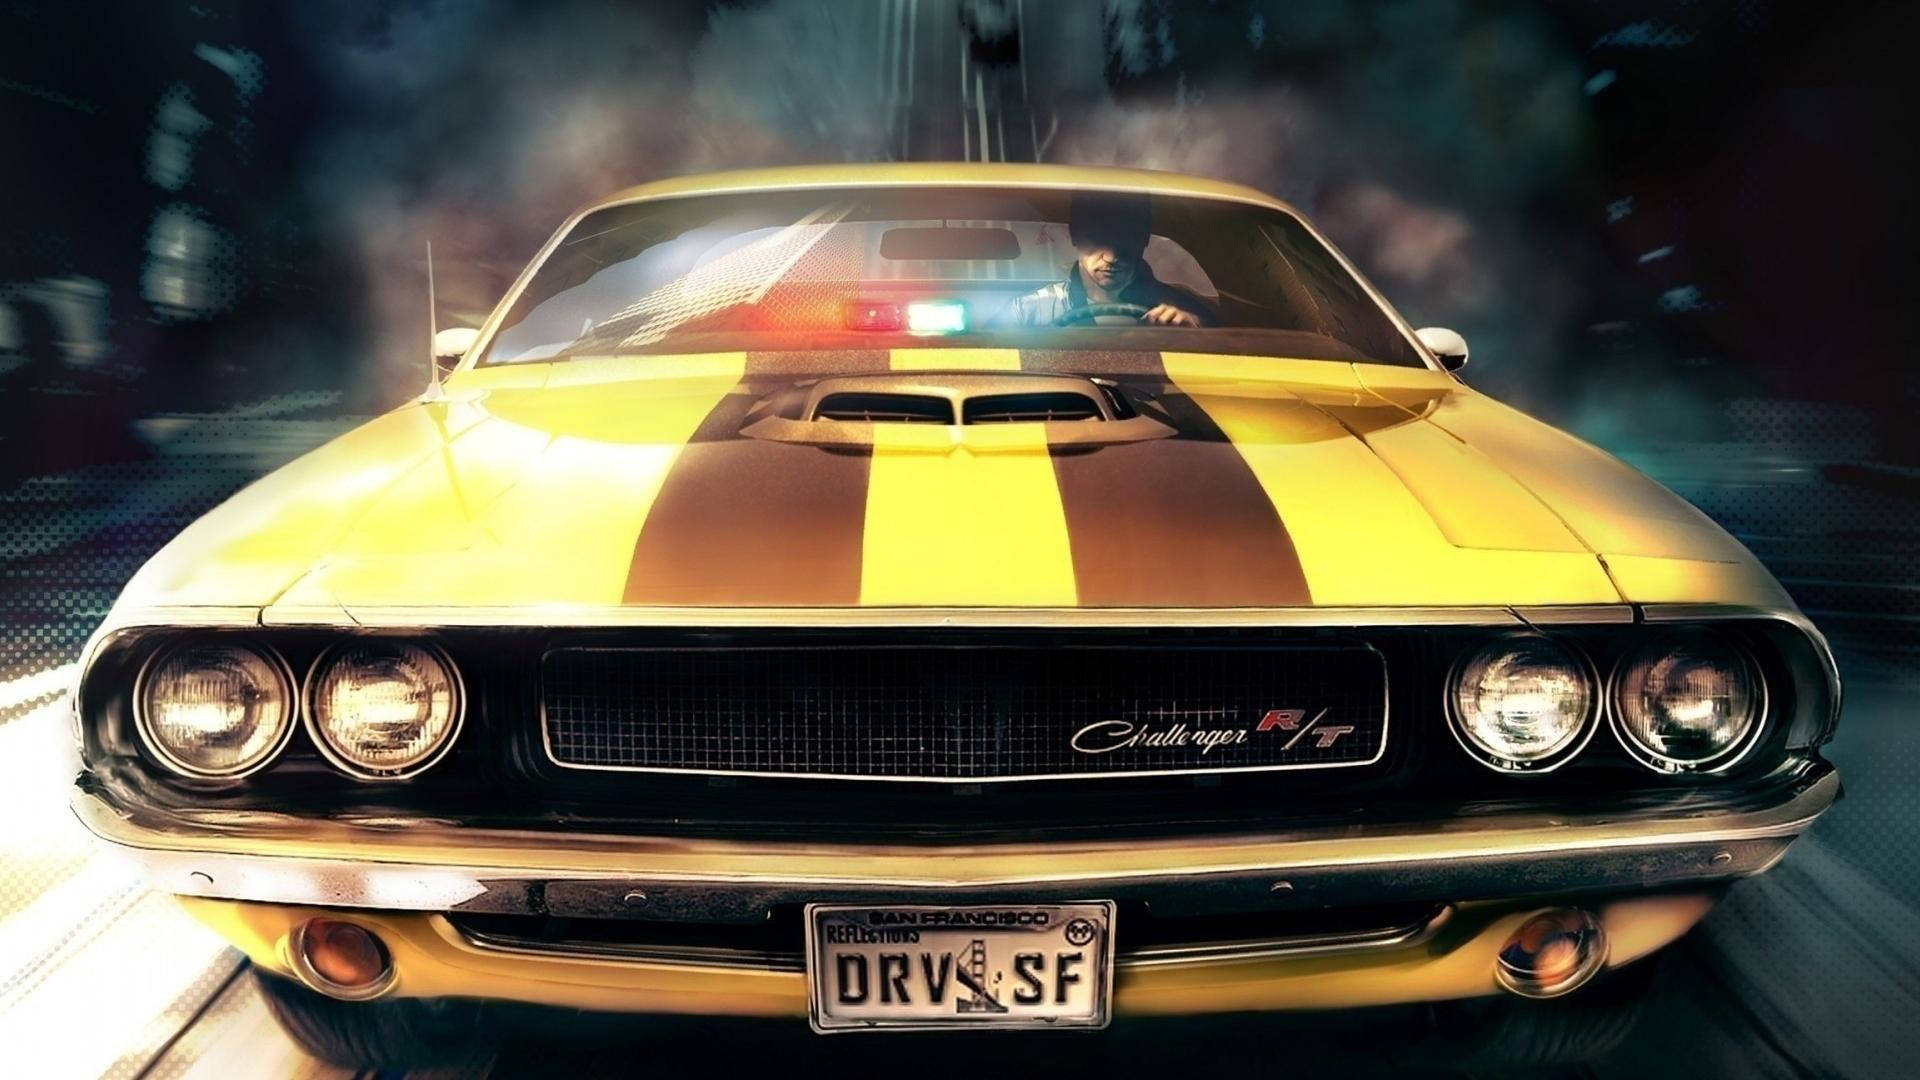 American Muscle Car In Yellow Paint